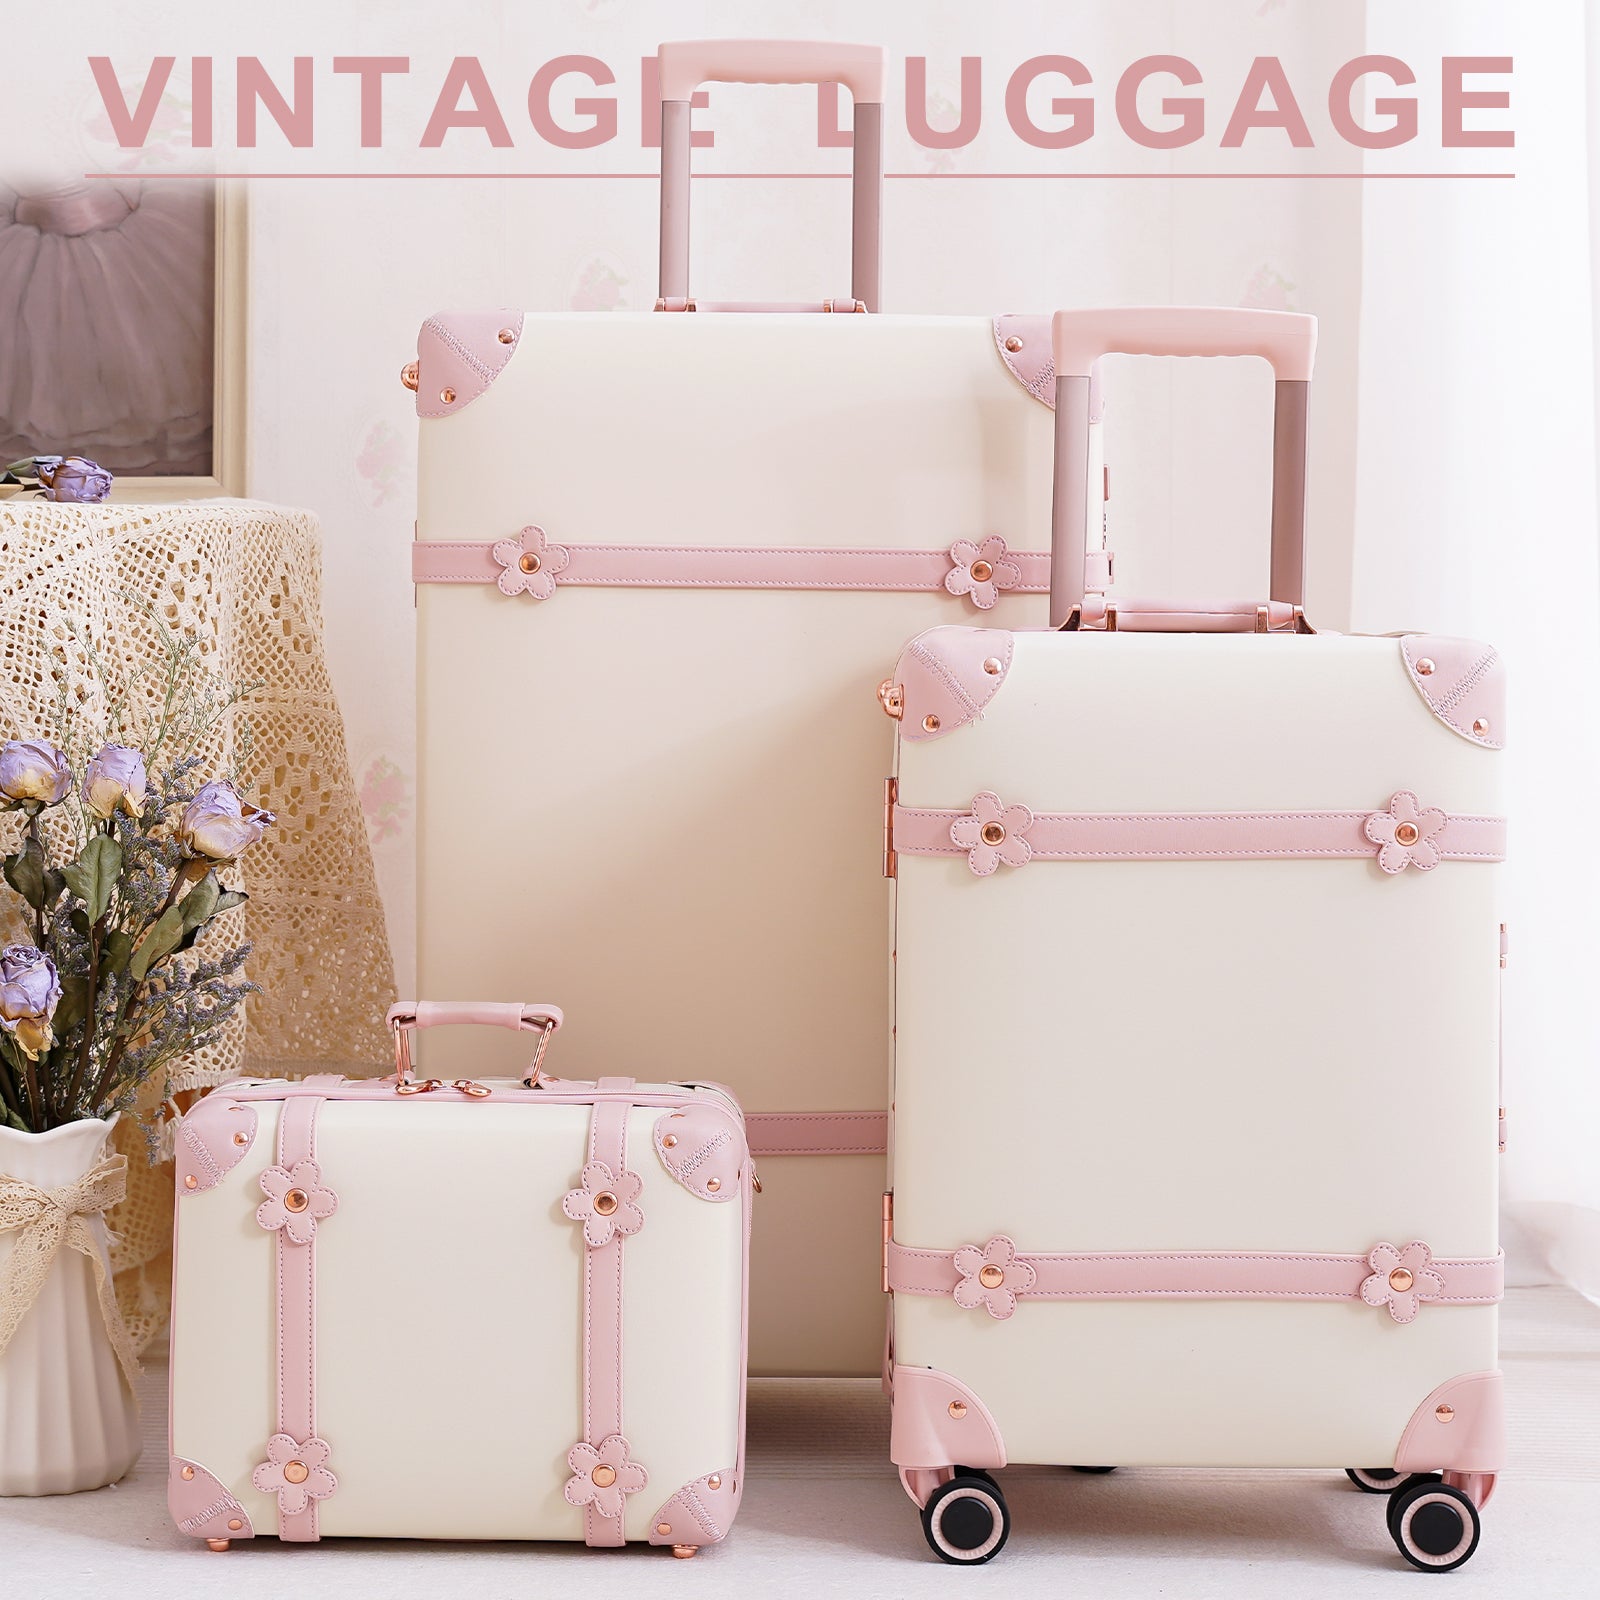 Travel in style – Customize your luggage!